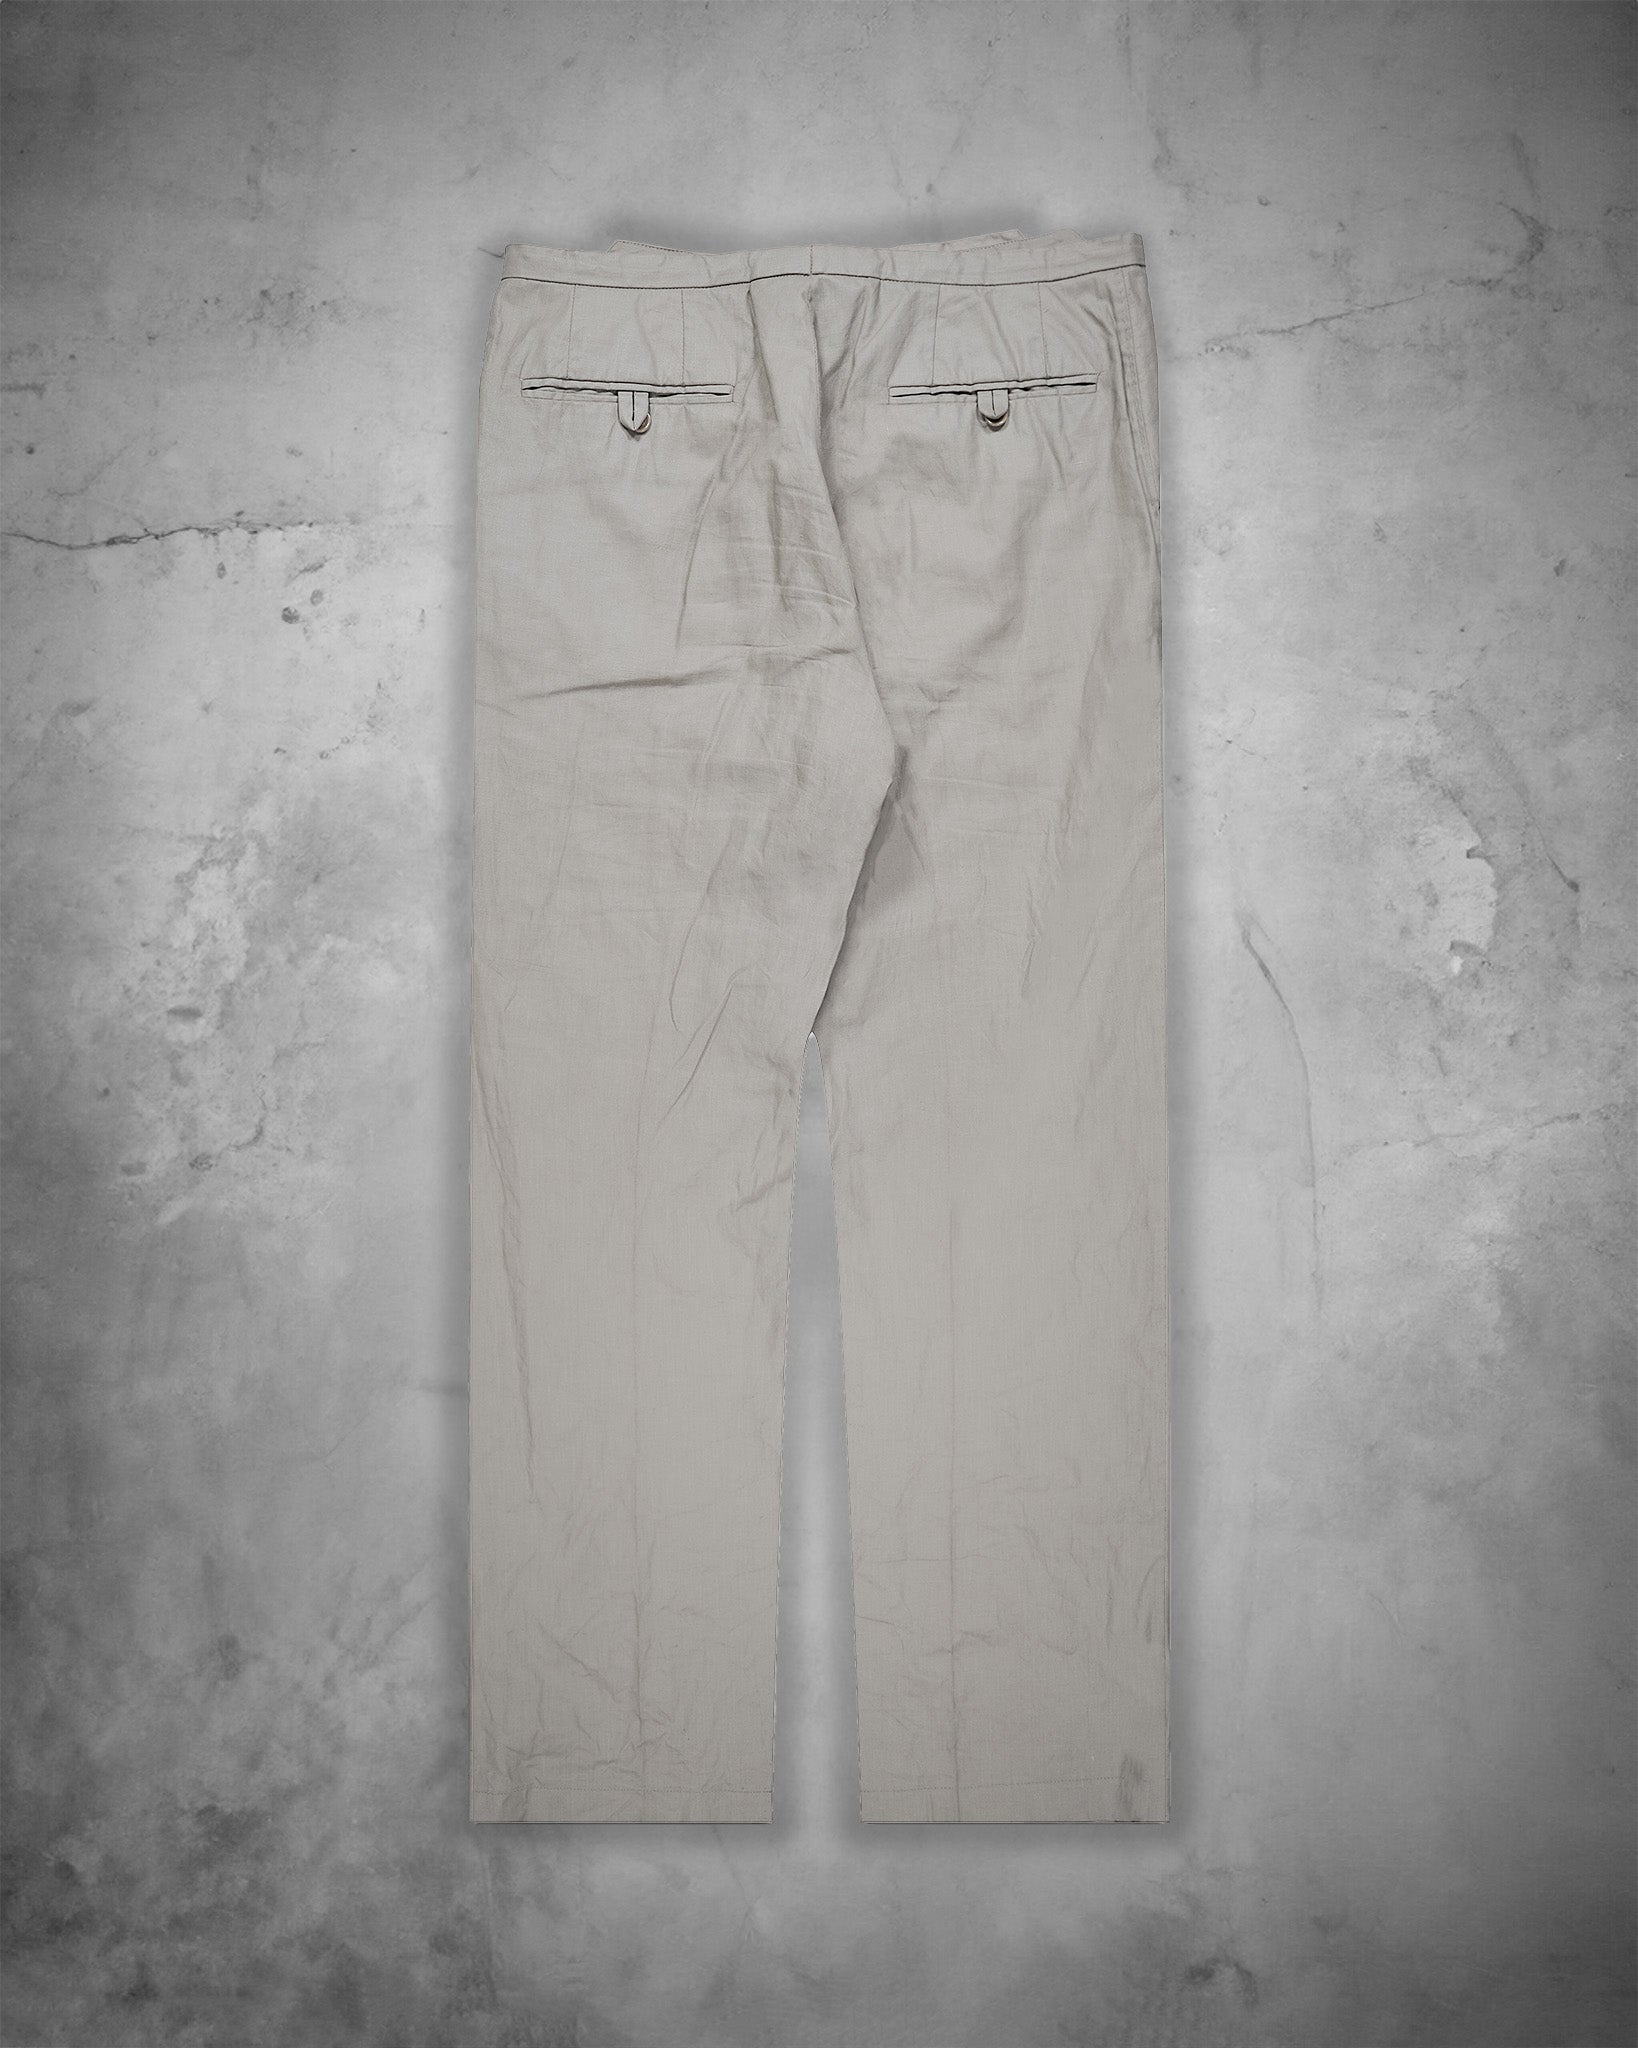 Carol Christian Poell “Ironproof” Wrinkled Trousers - SS97 "Laser"